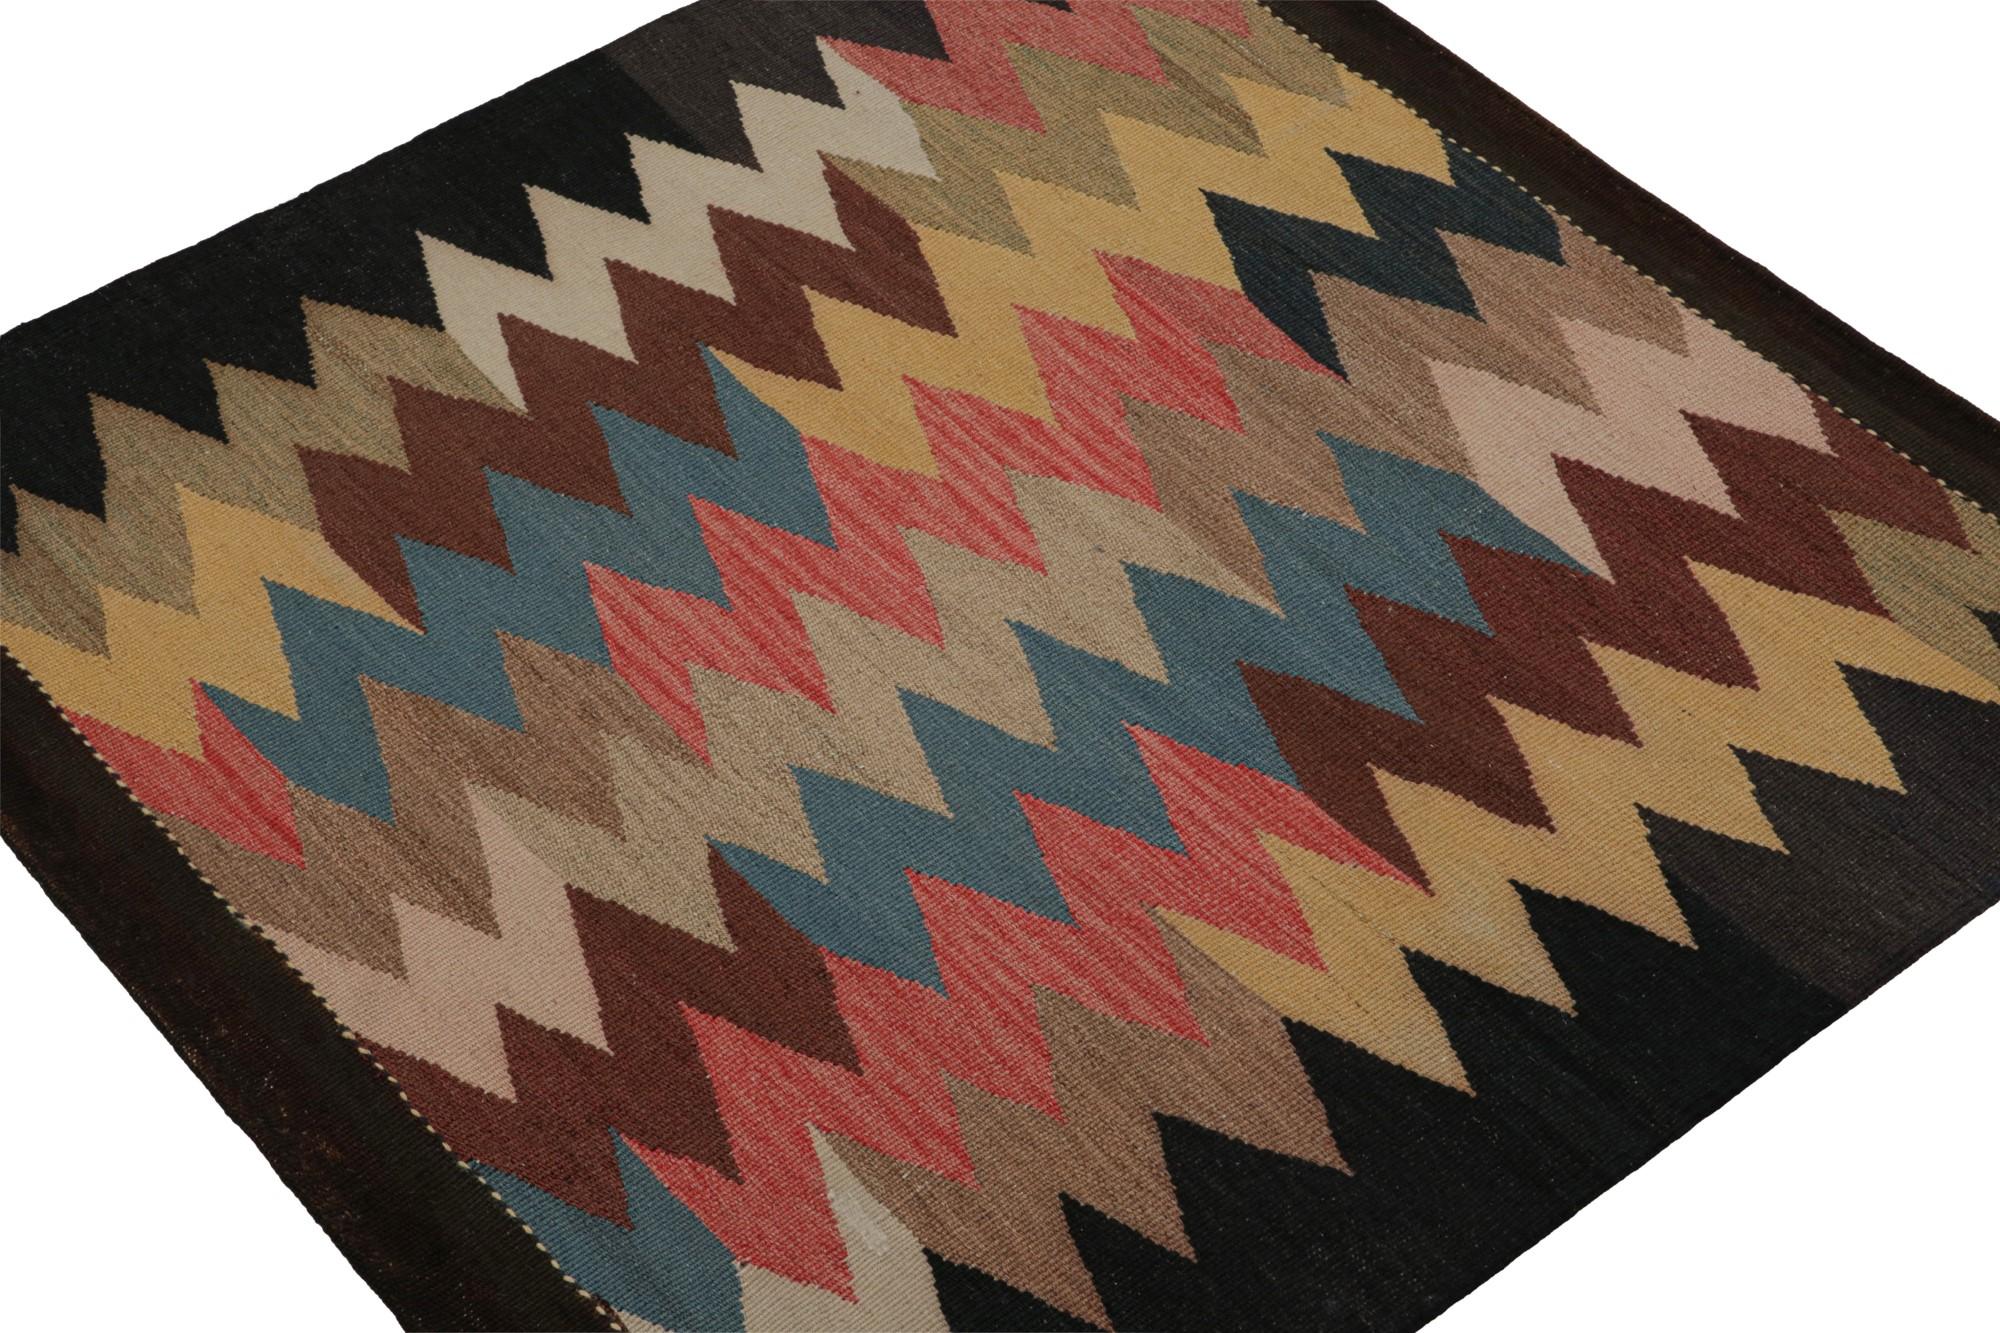 Hand-knotted in wool, this 3x3 vintage Persian Sofreh kilim and square rug originating from Afghanistan features colorful chevron patterns across the surface. 

On the design: 

Sofreh Kilims like this piece are known for their minimalist patterns